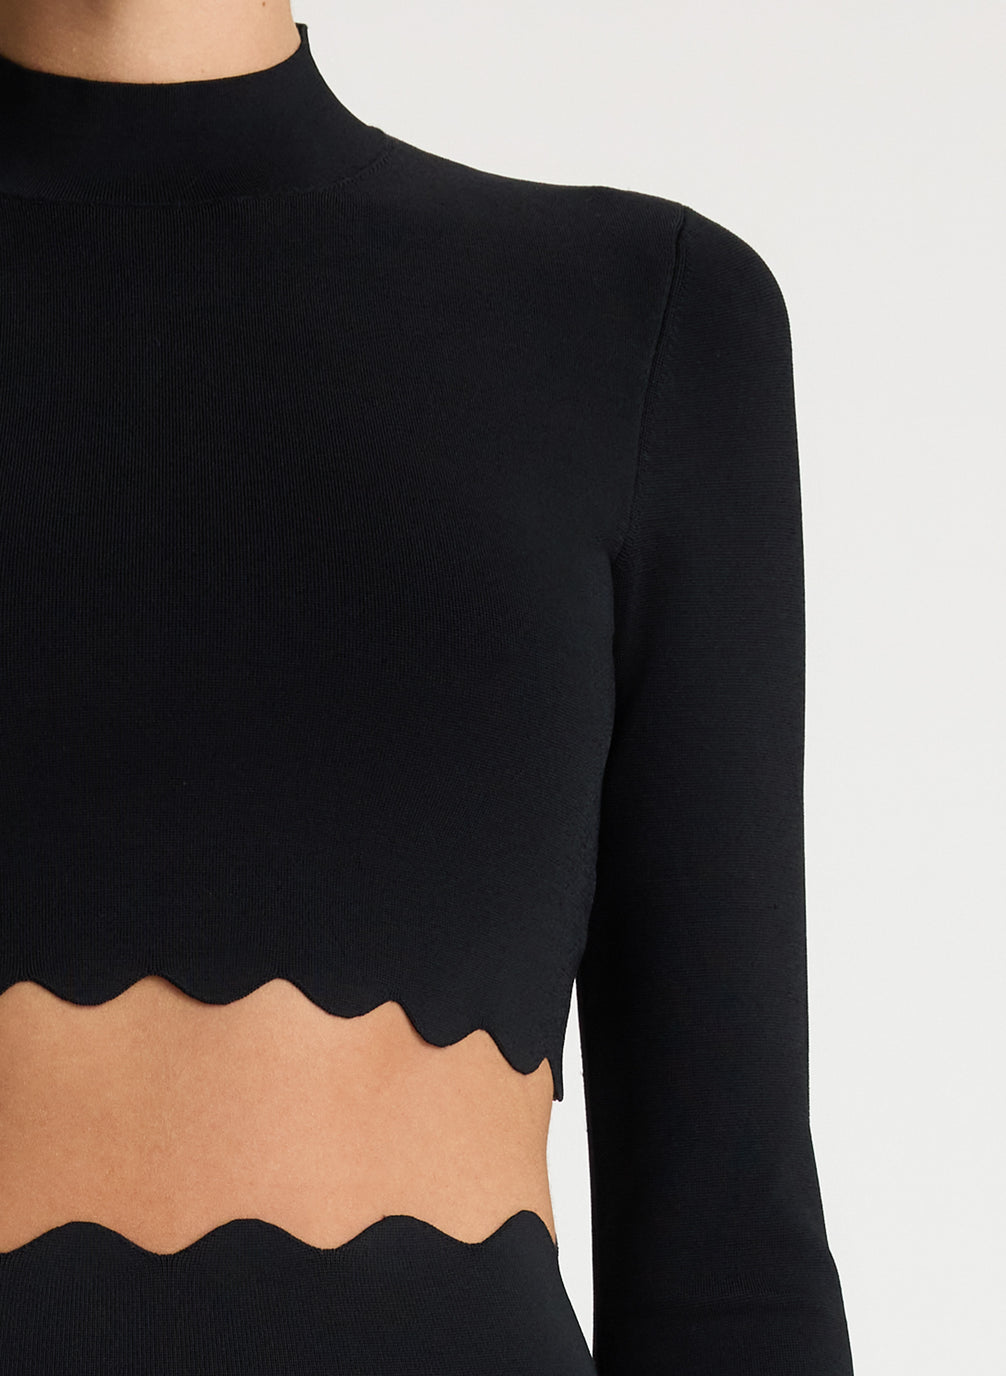 Bea Scalloped Knit Crop Top